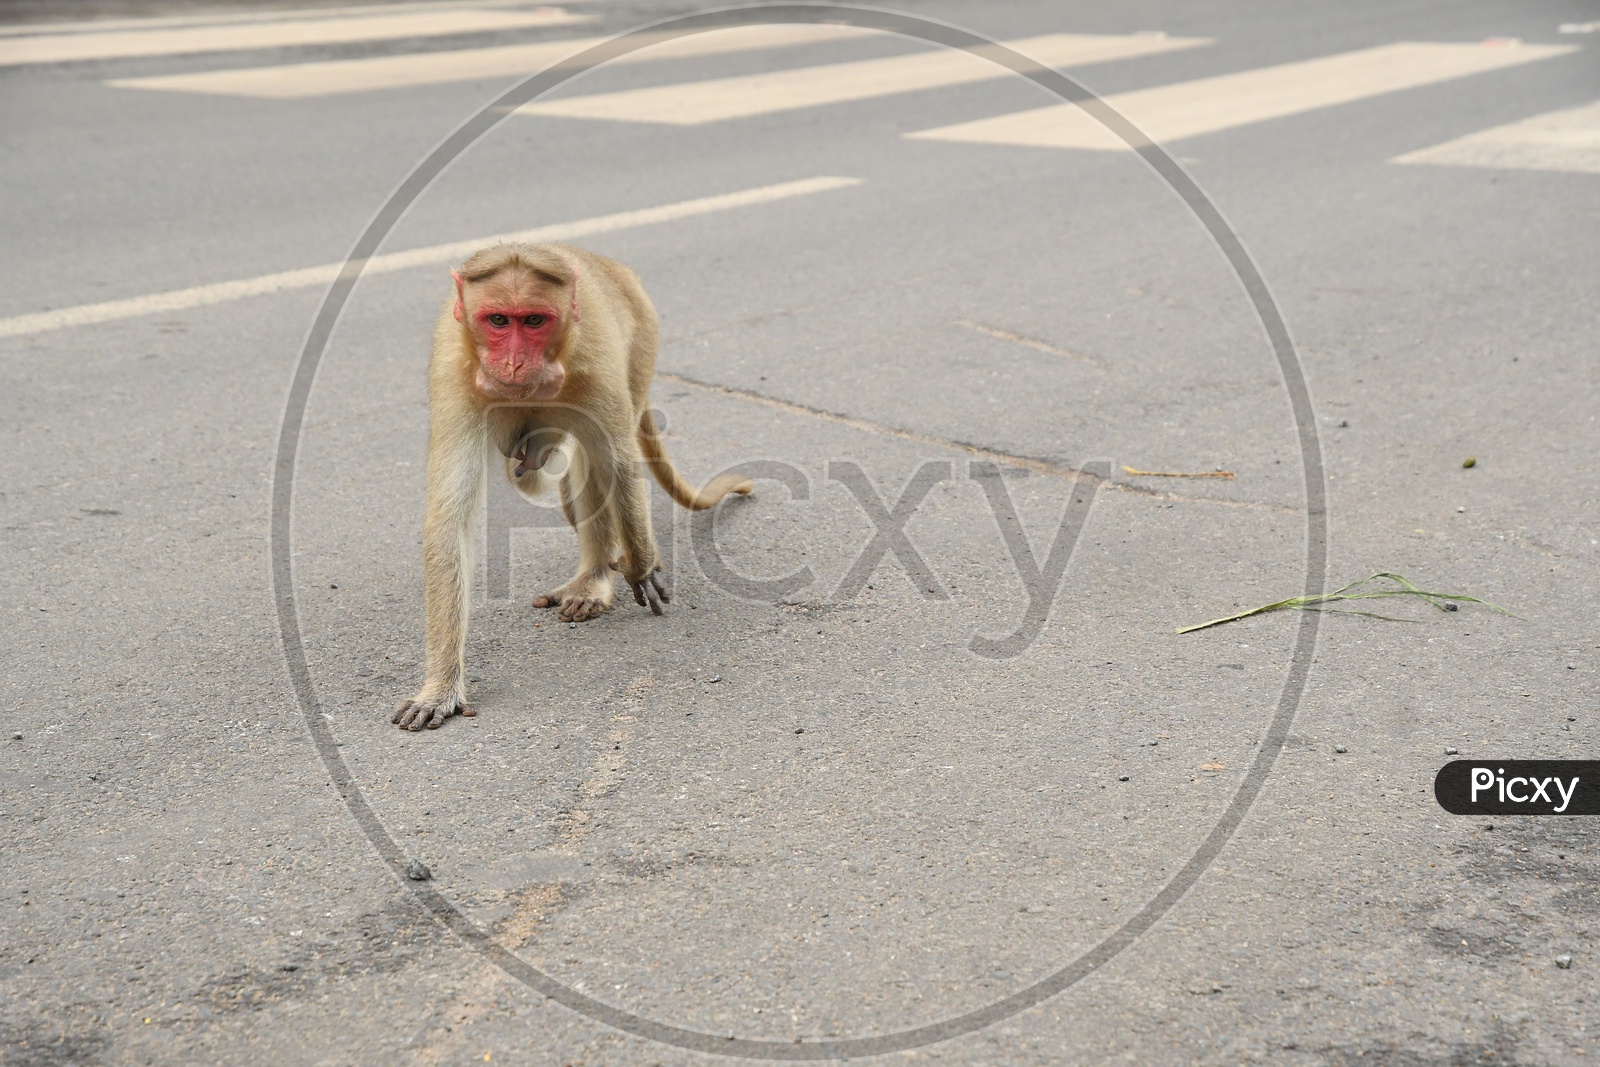 A Monkey moving on the road